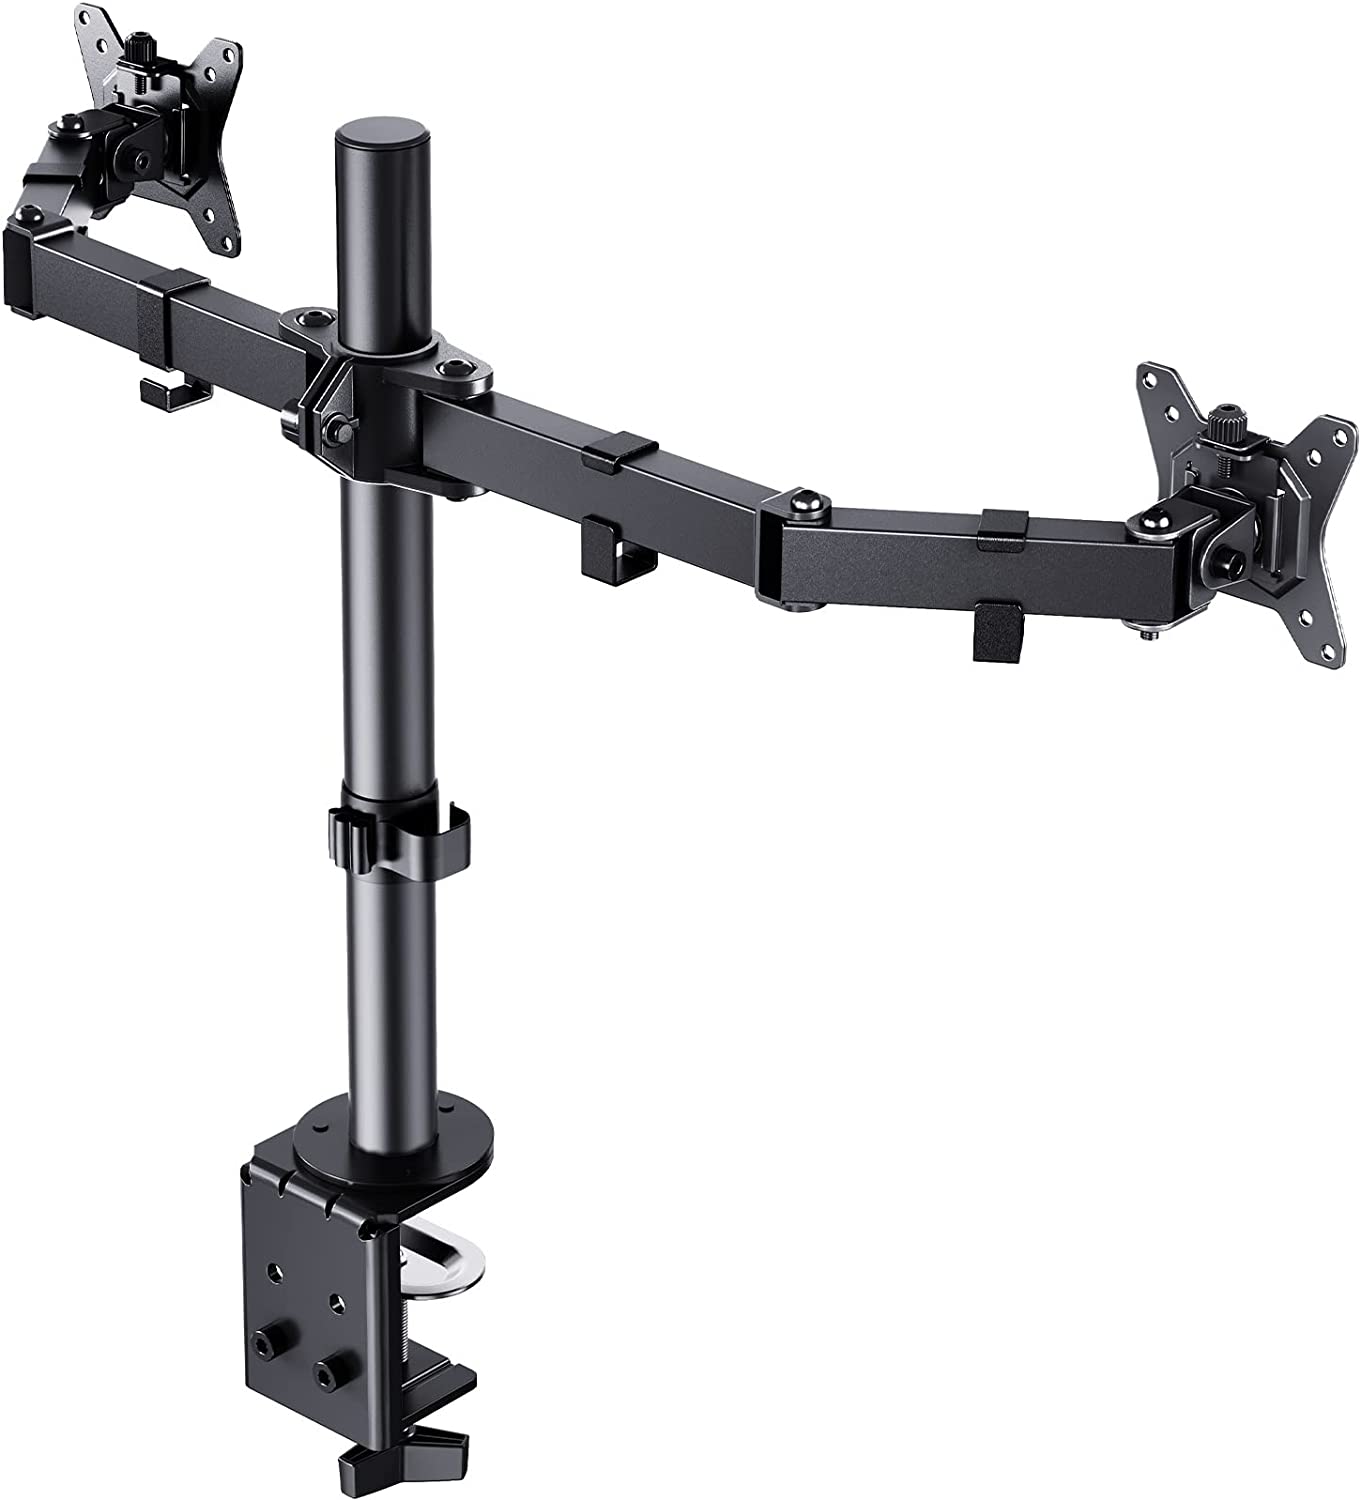 ErGear Fully Adjustable Dual Arm Monitor Desk Mount (for 13 to 32" Monitors) $17.25 + Free Shipping